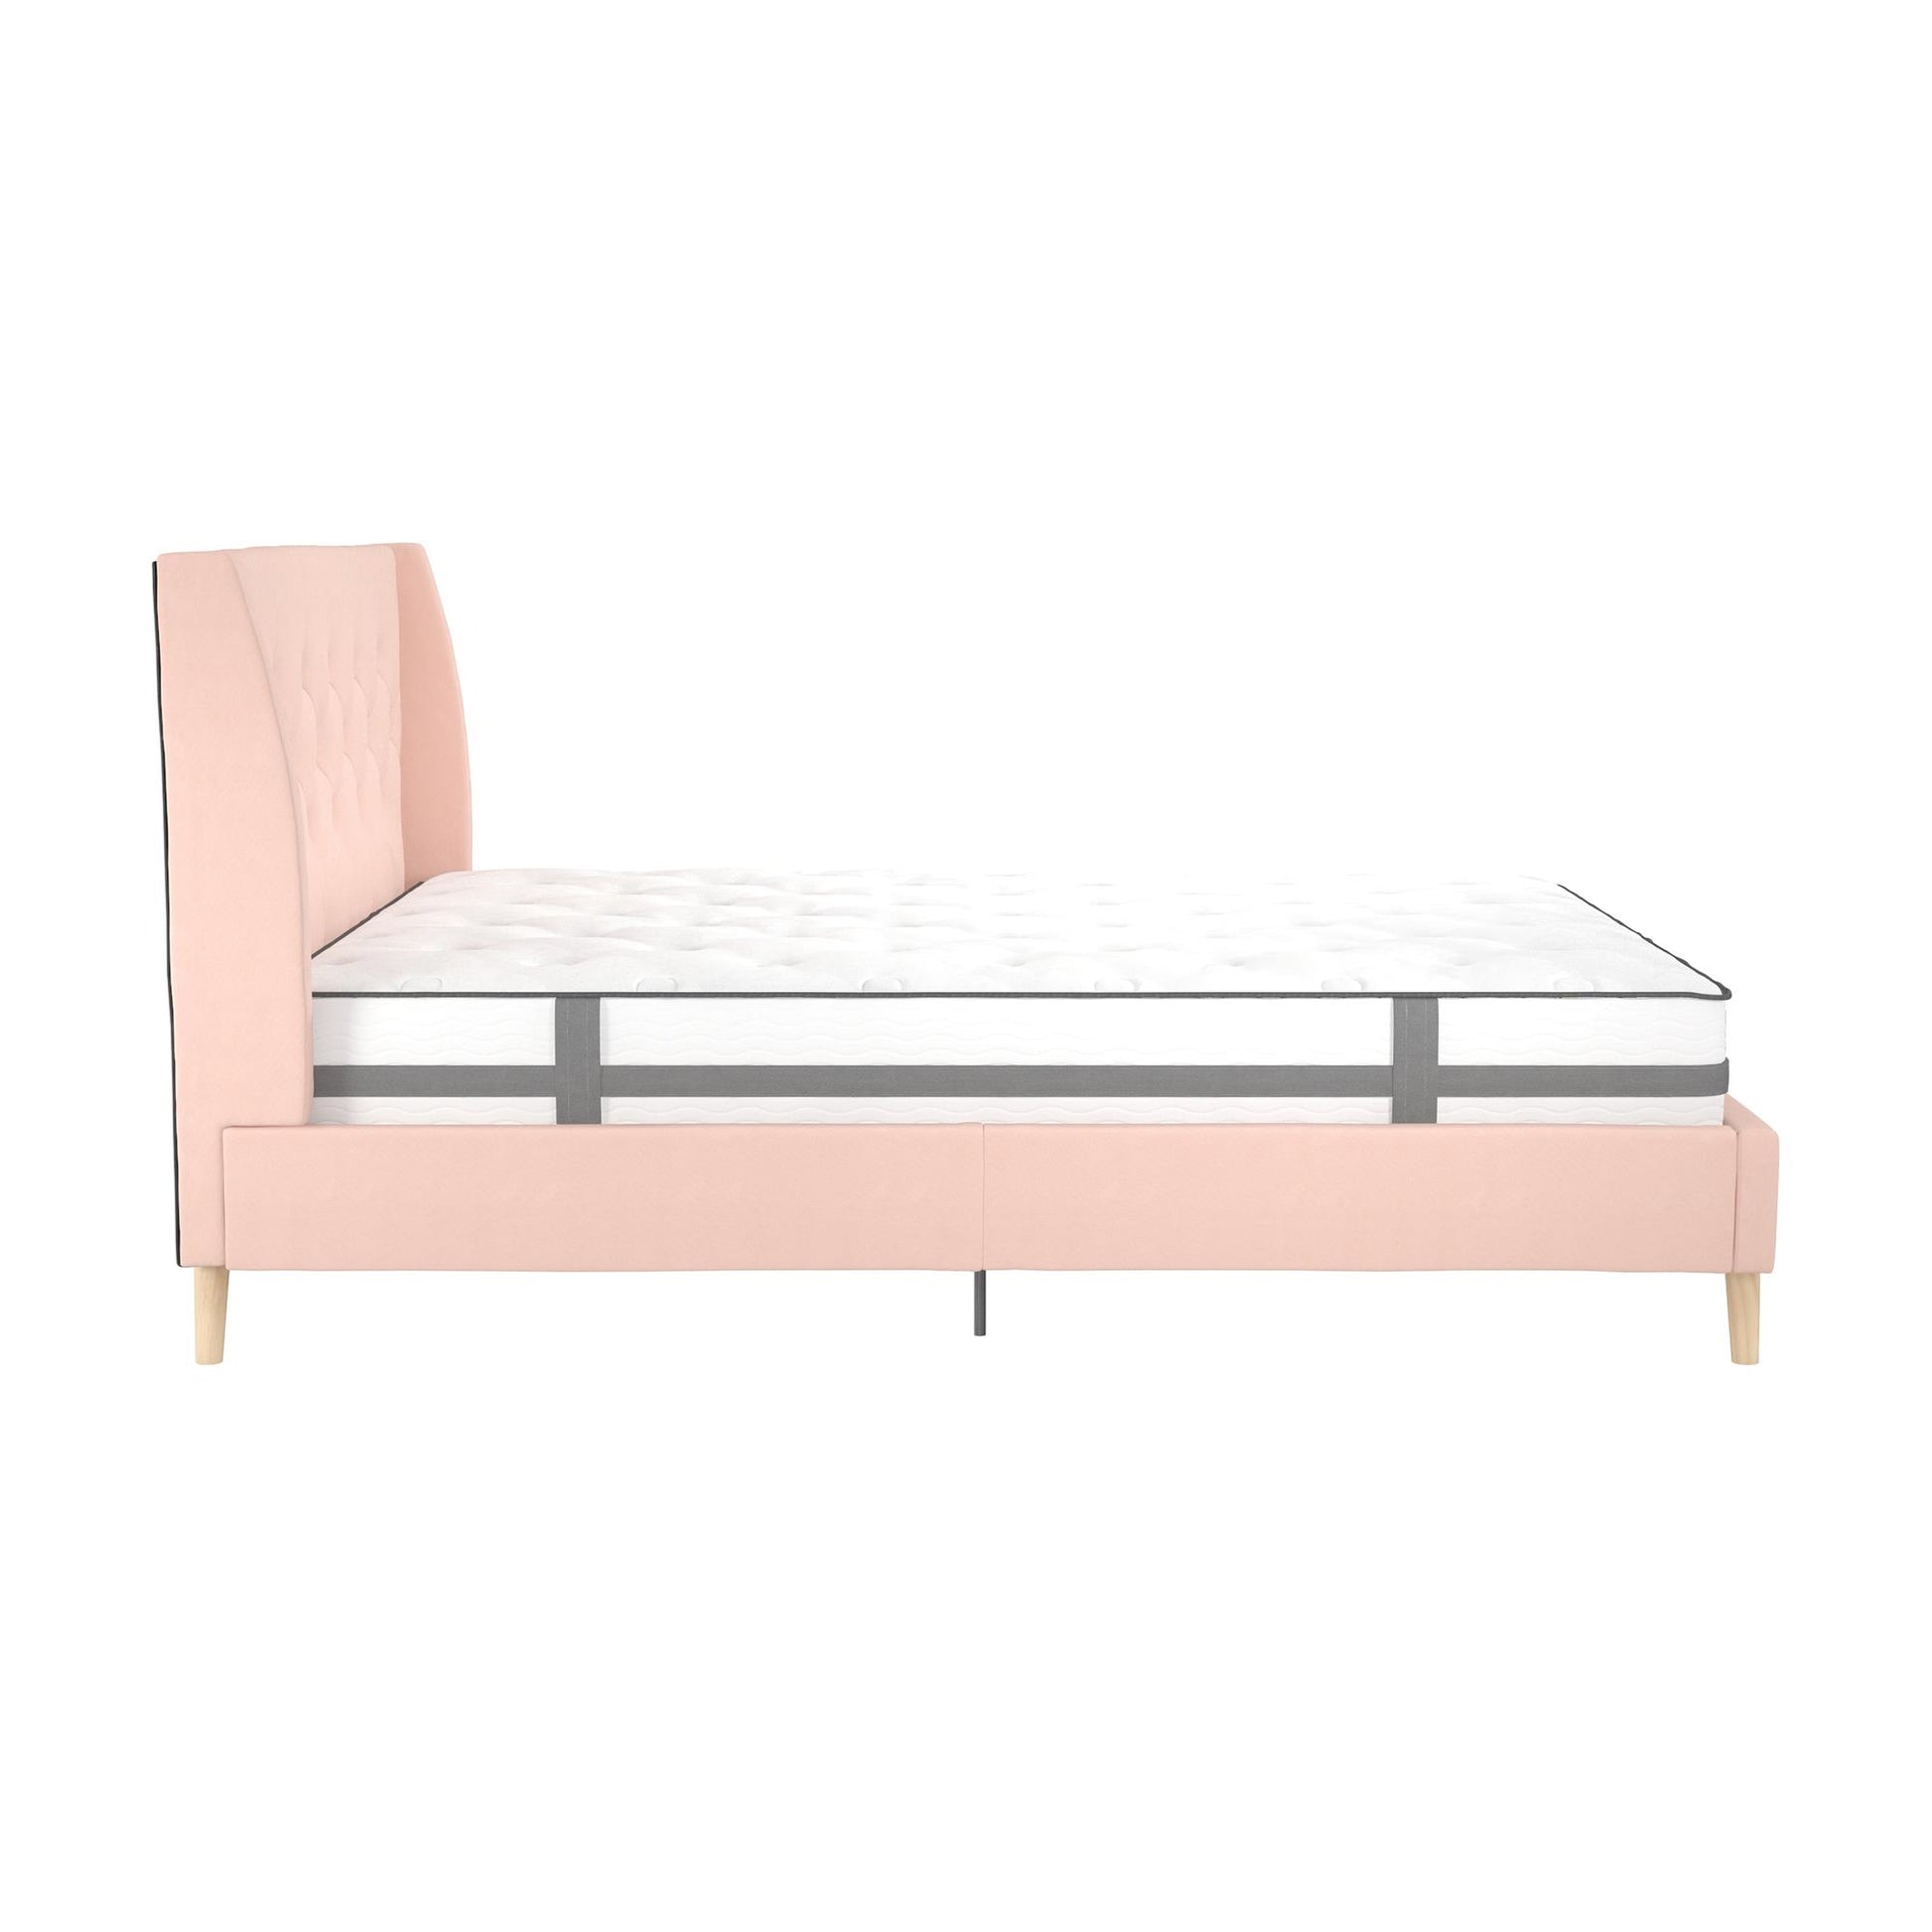 Her Majesty Bed - Pink - Full